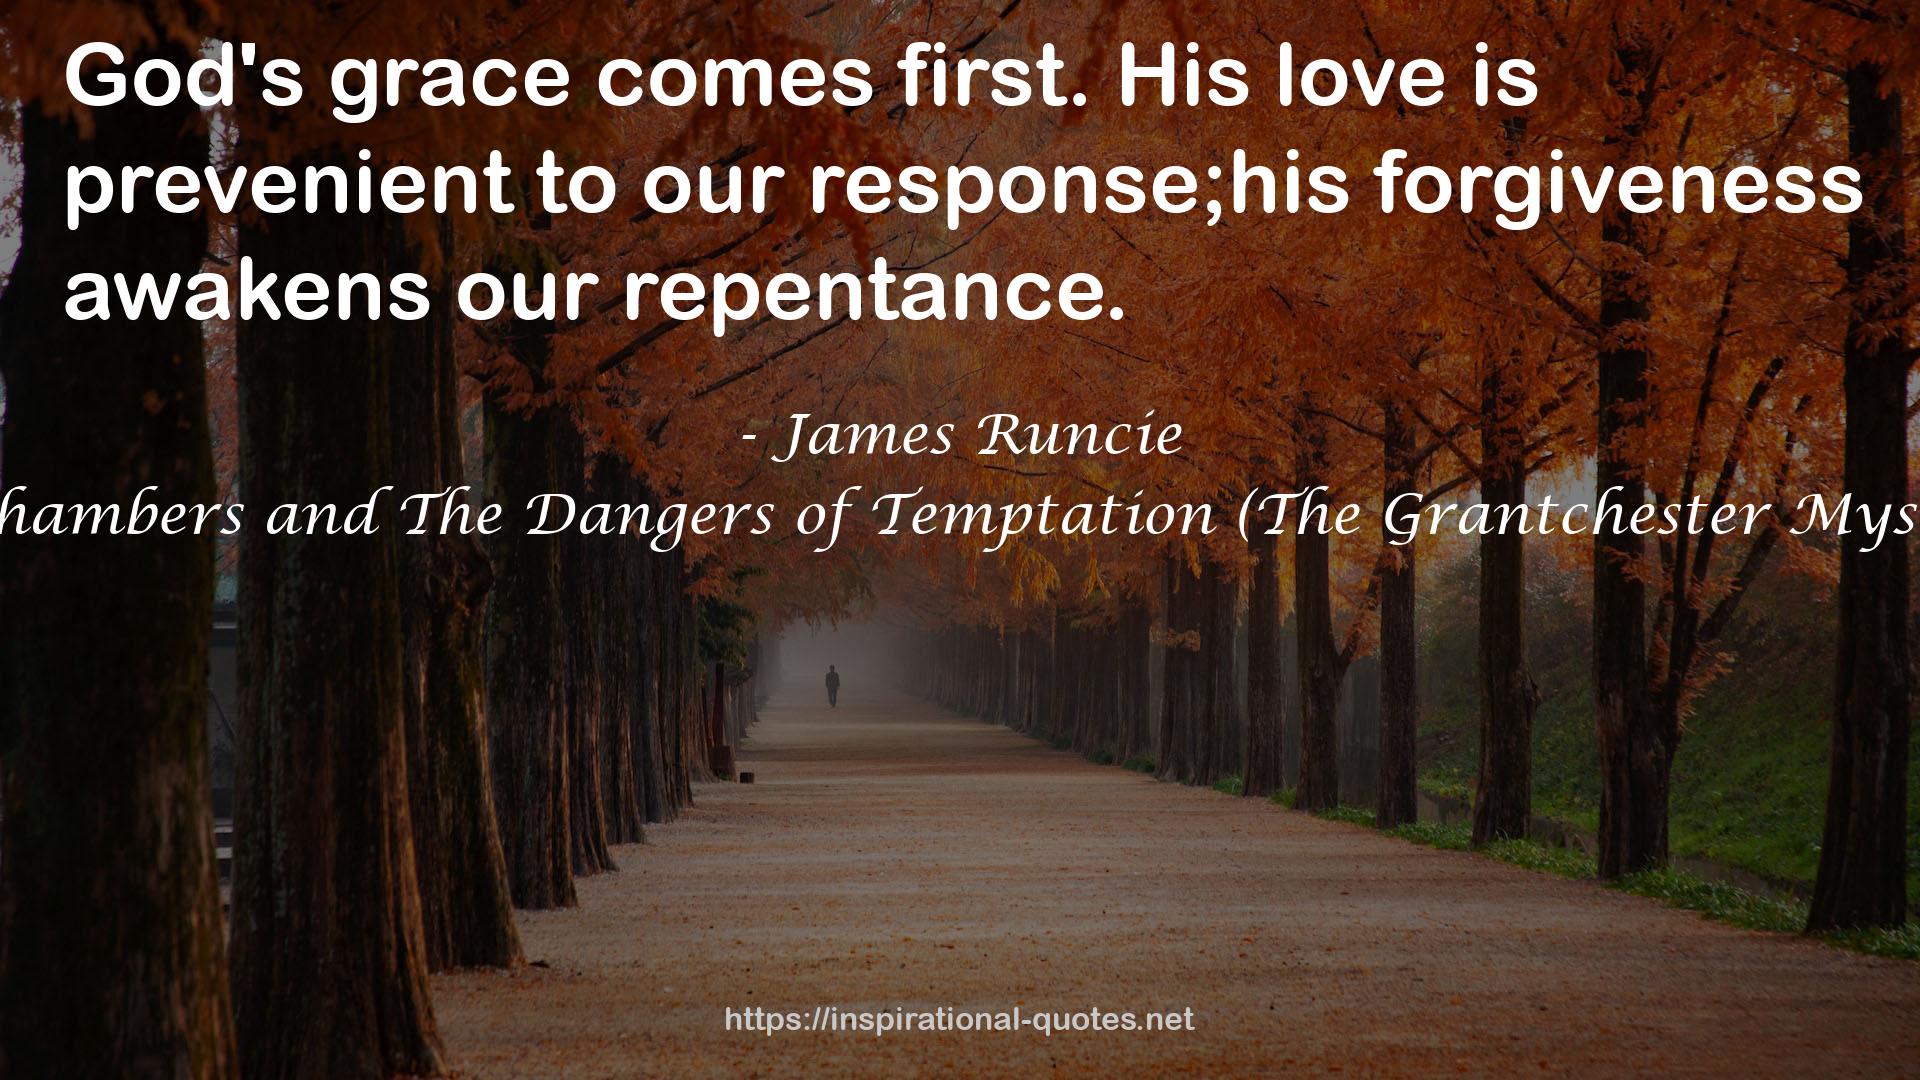 Sidney Chambers and The Dangers of Temptation (The Grantchester Mysteries #5) QUOTES